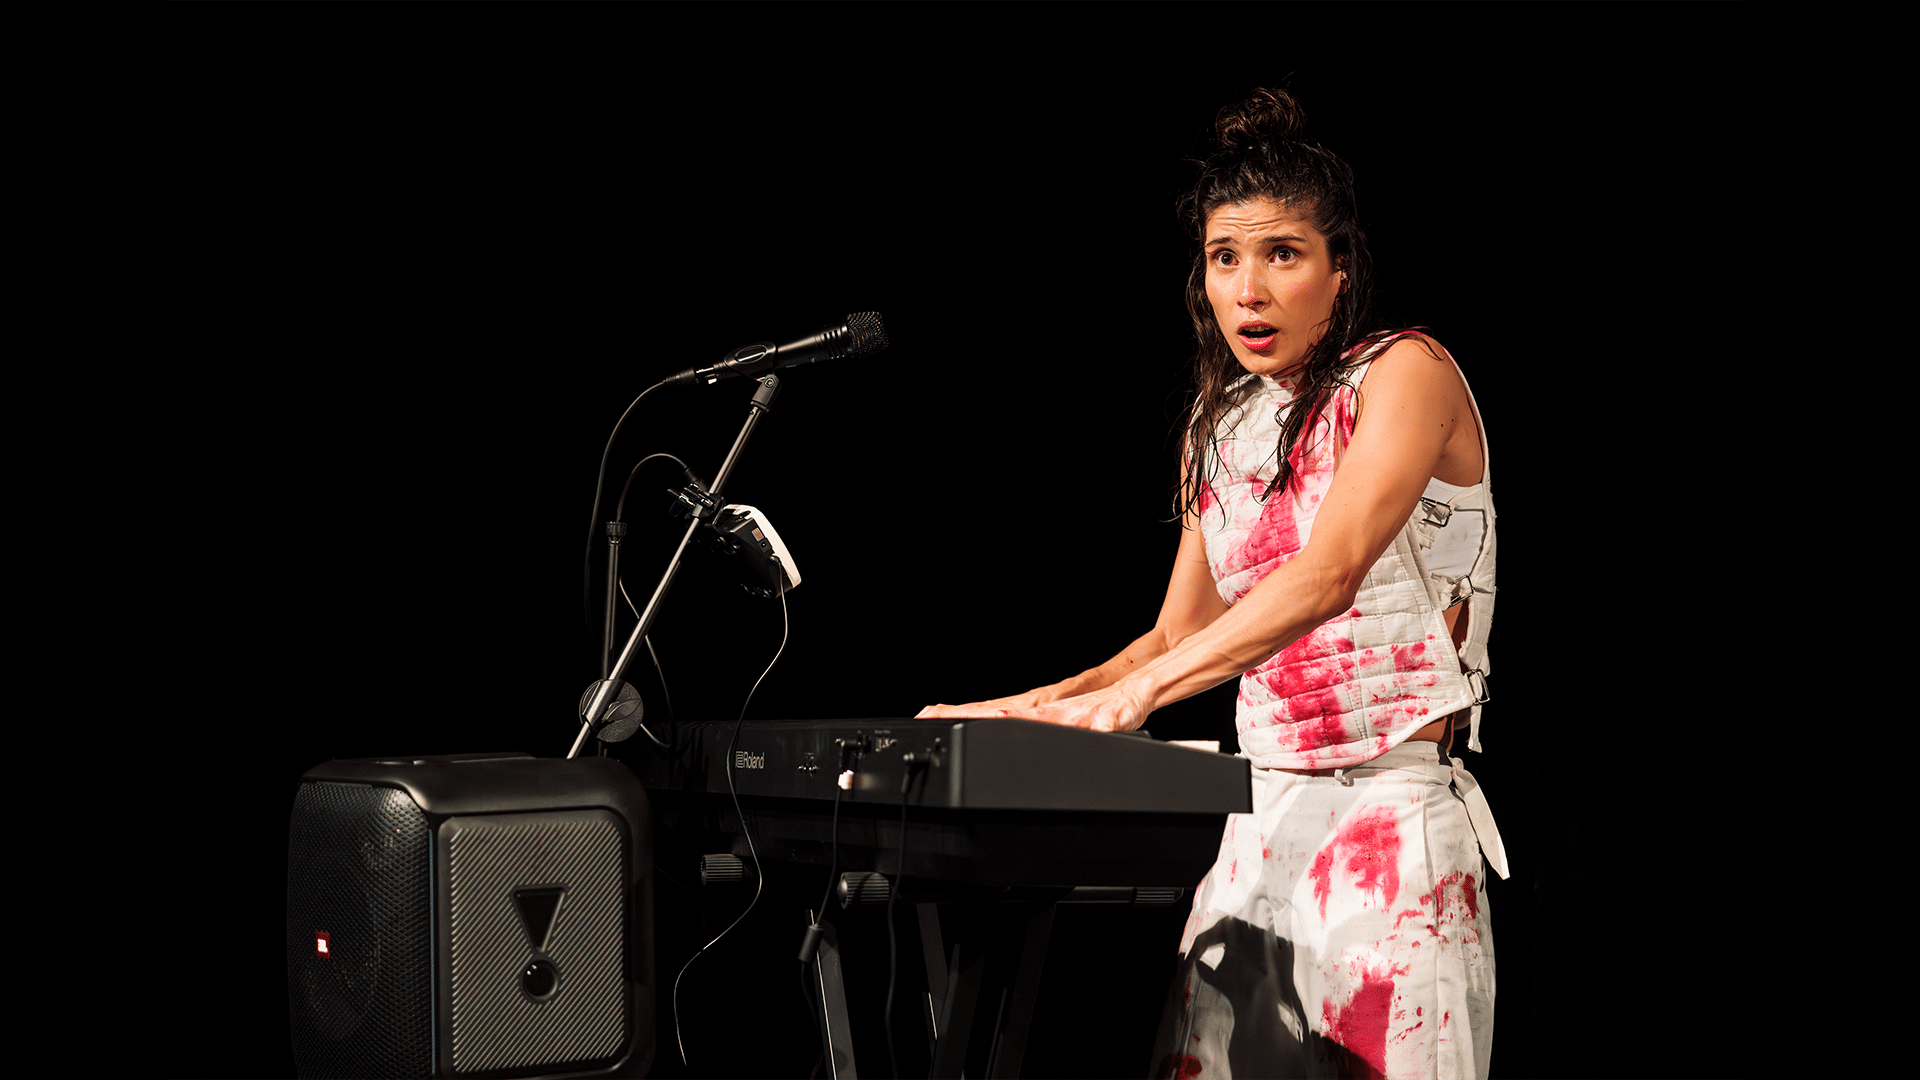 A woman wearing a white outfit covered in red stains plays the keyboard, she looks shocked.